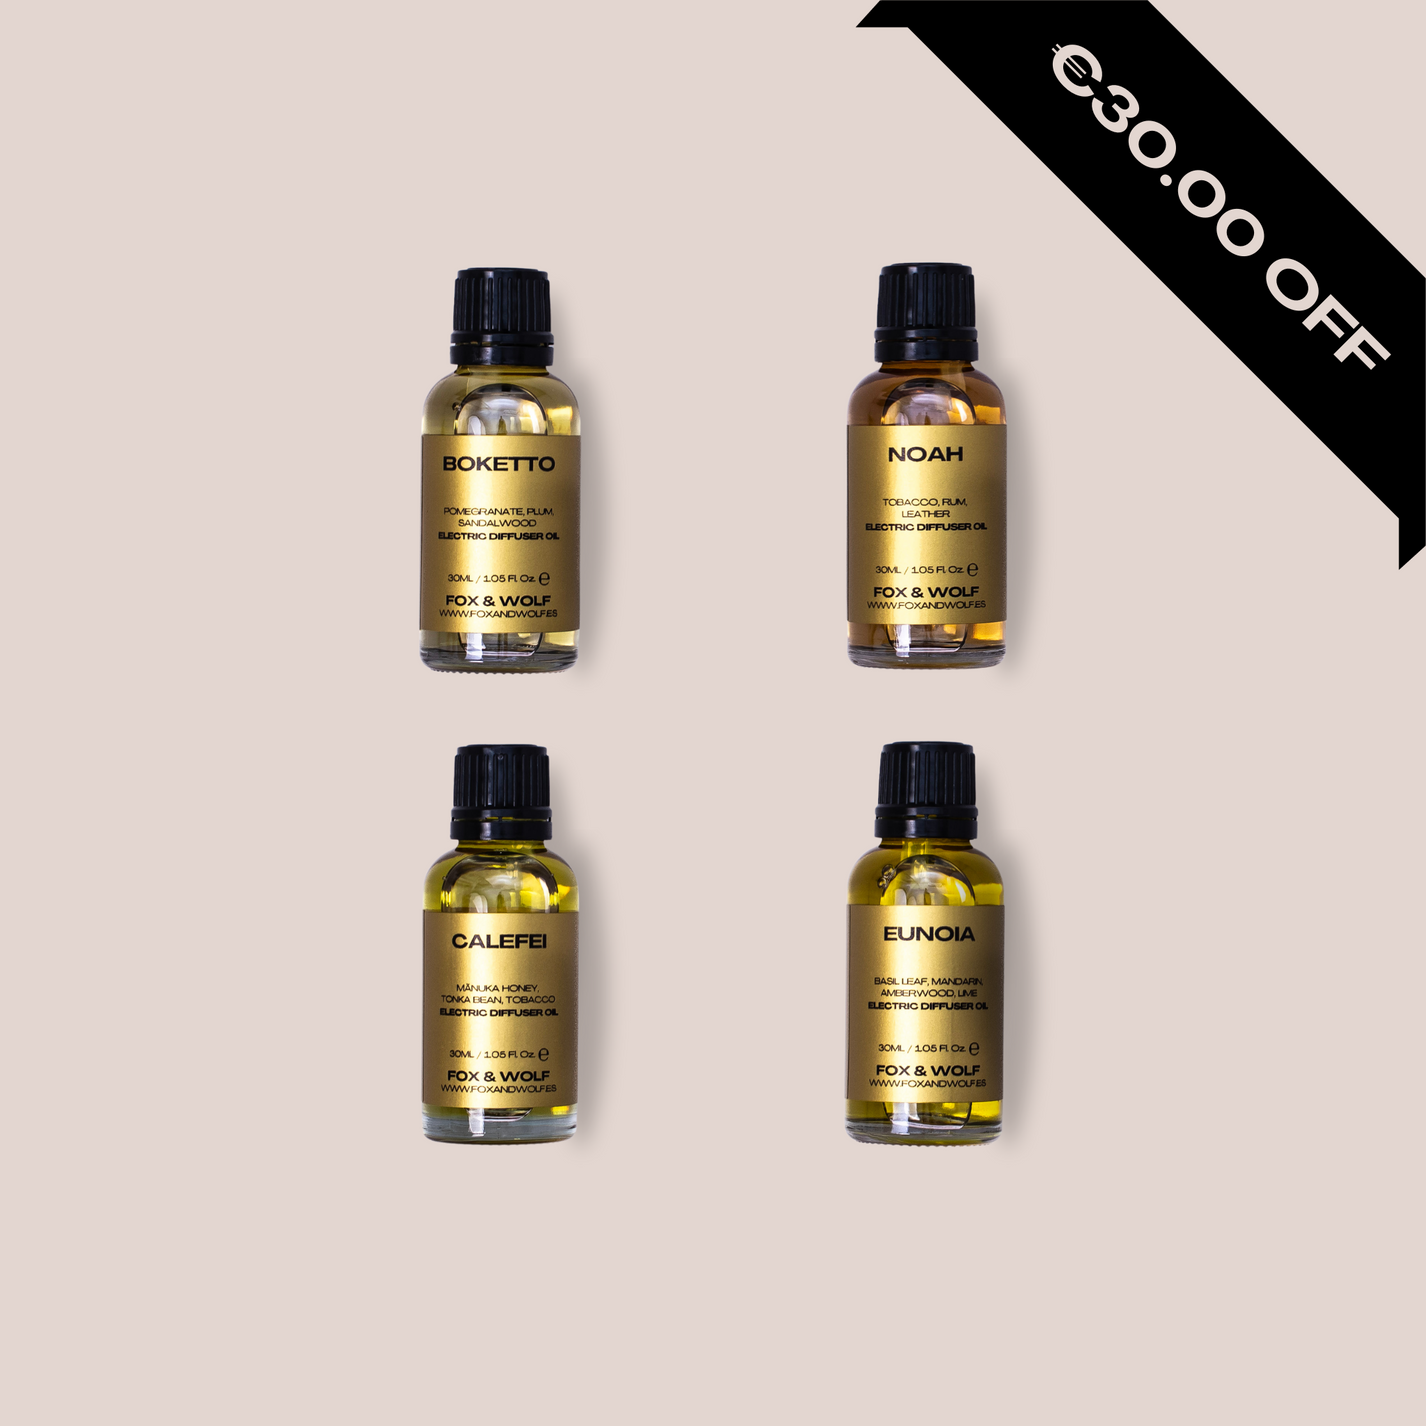 BUY 3 (30ML) ELECTRIC DIFFUSER OILS, GET 1 FOR FREE